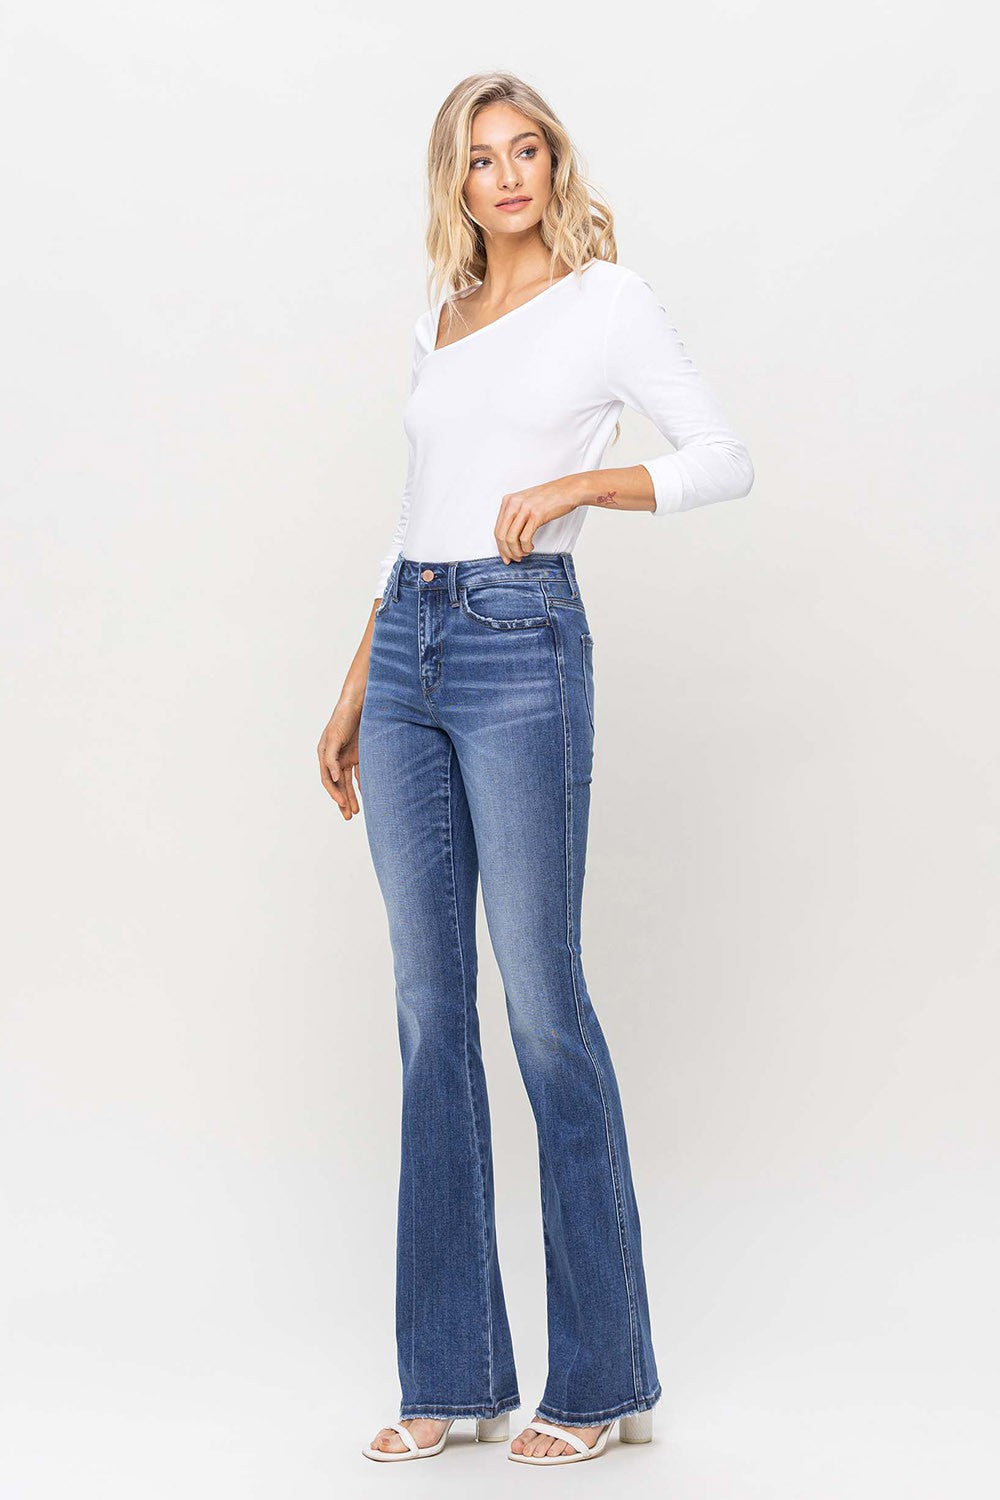 Flying Monkey High Rise Bootcut Jeans